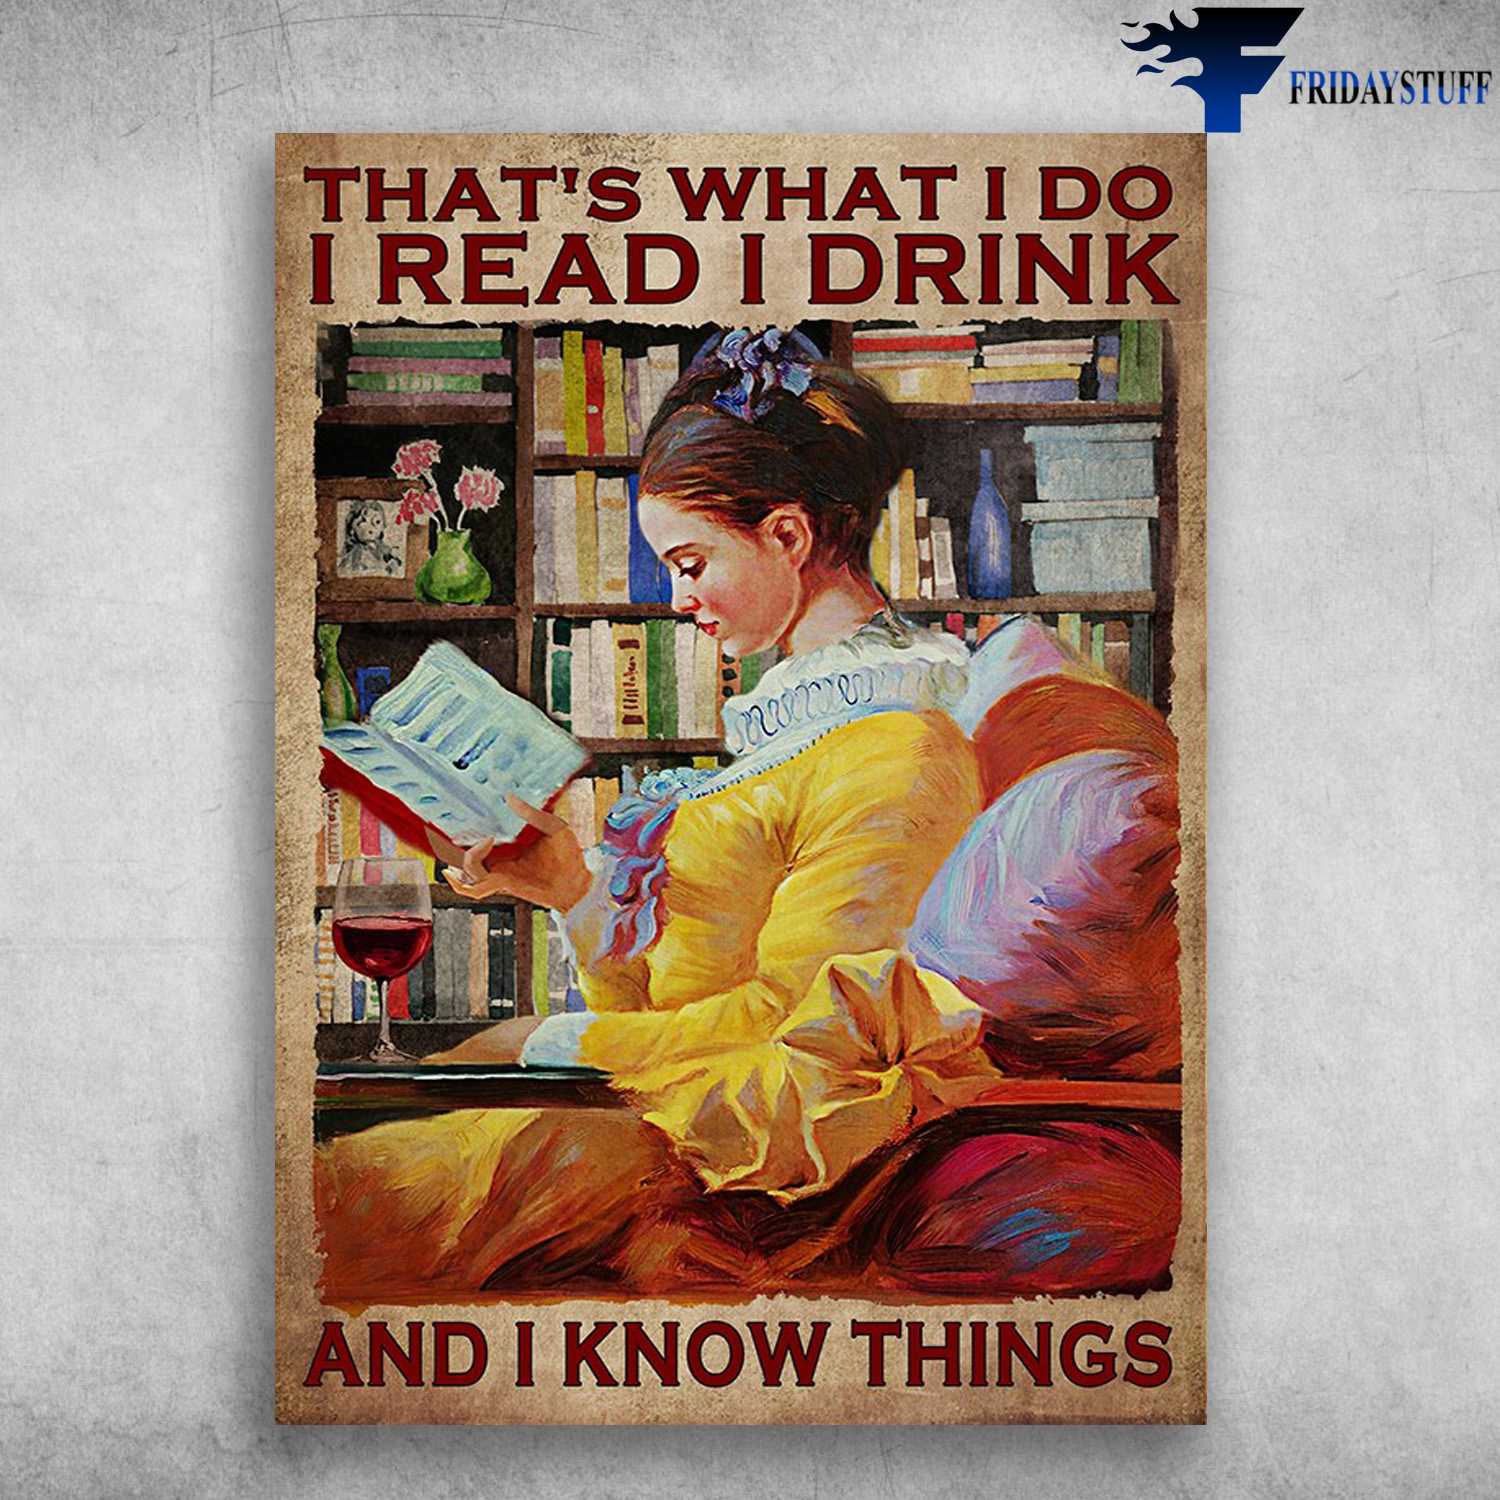 Book And Wine, Girl Reads Book - That's What I Do, I Read, I Drink, And I Know Things